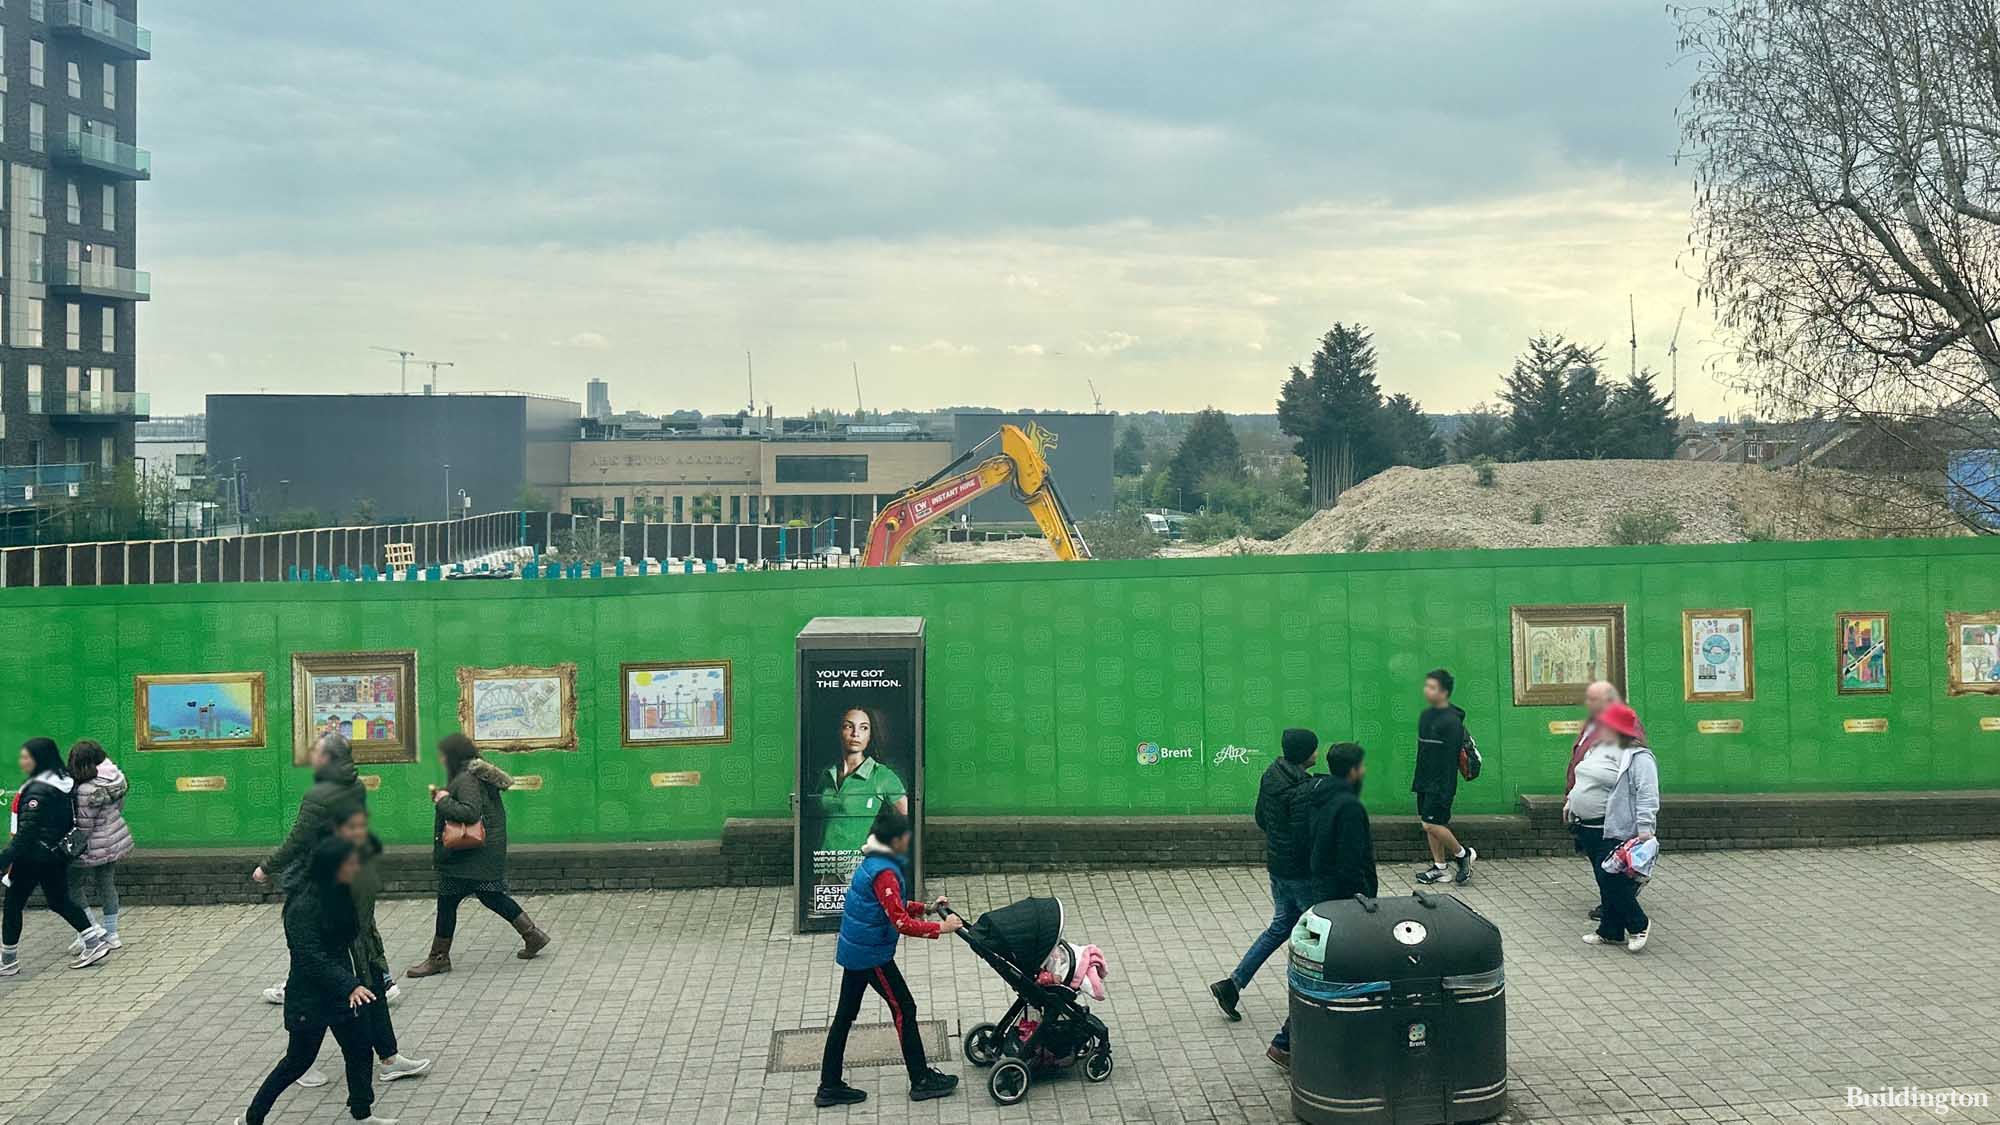 Work on site at Copland School and Residences development site in Spring 2023